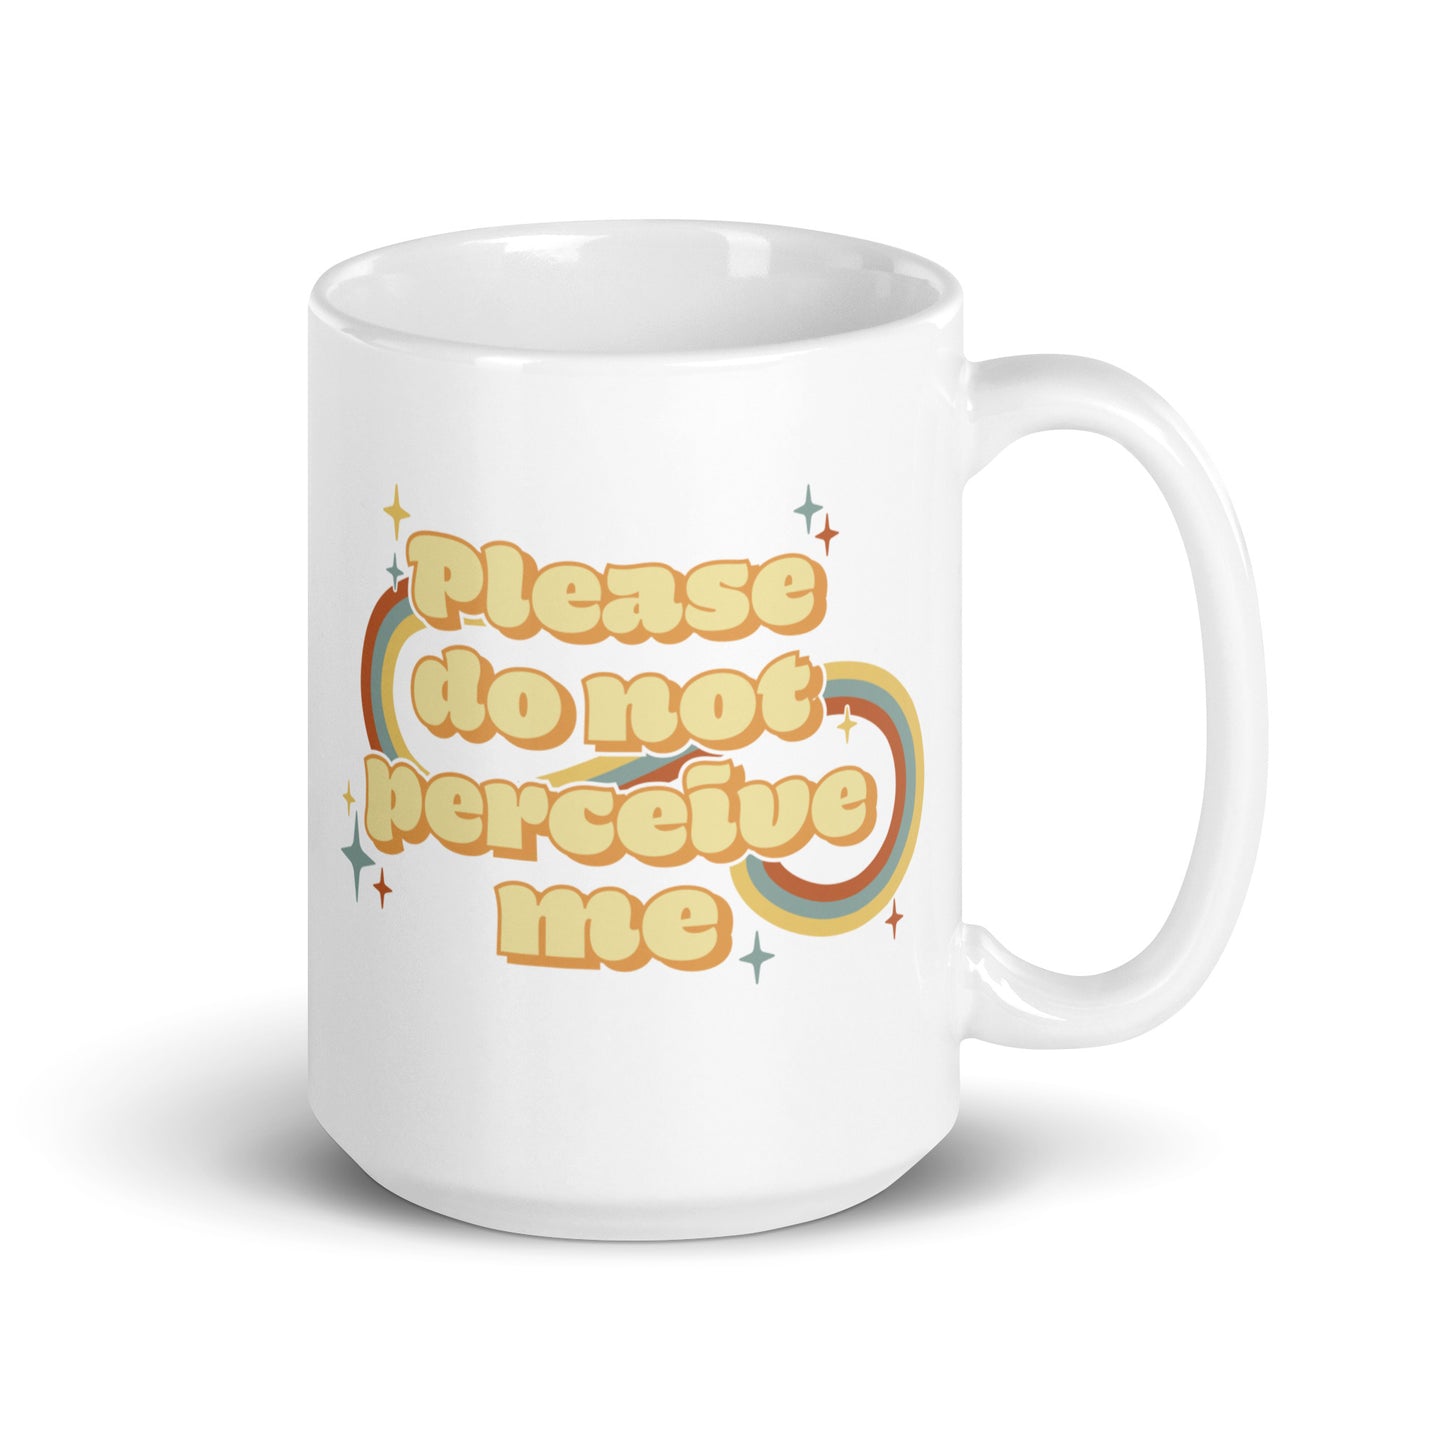 An 15 ounce white ceramic mug featuring vintage-style text that reads "Please do not perceive me". A colorful swirl and sparkles surrounds the text in red, yellow, and blue.